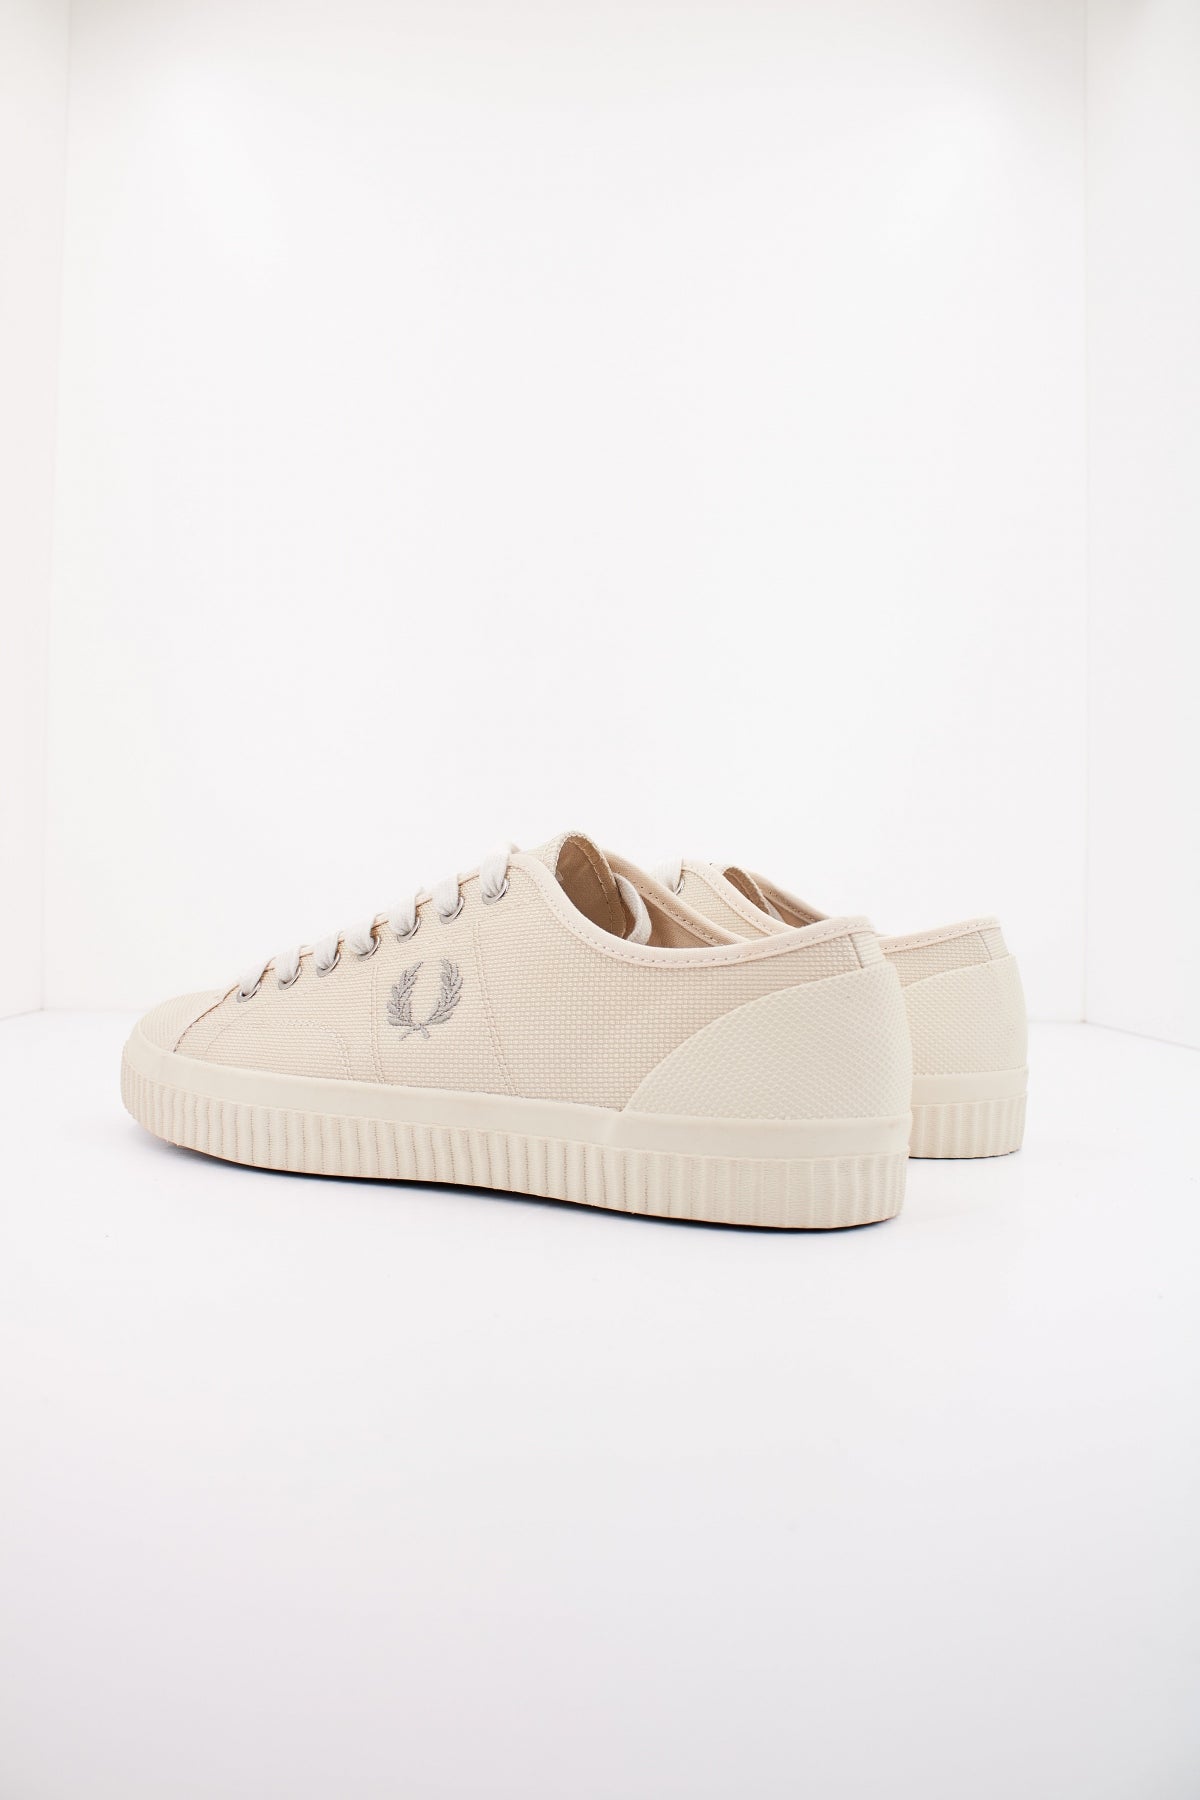 FRED PERRY  HUGHES LOW TEXTURED en color BEIS  (3)